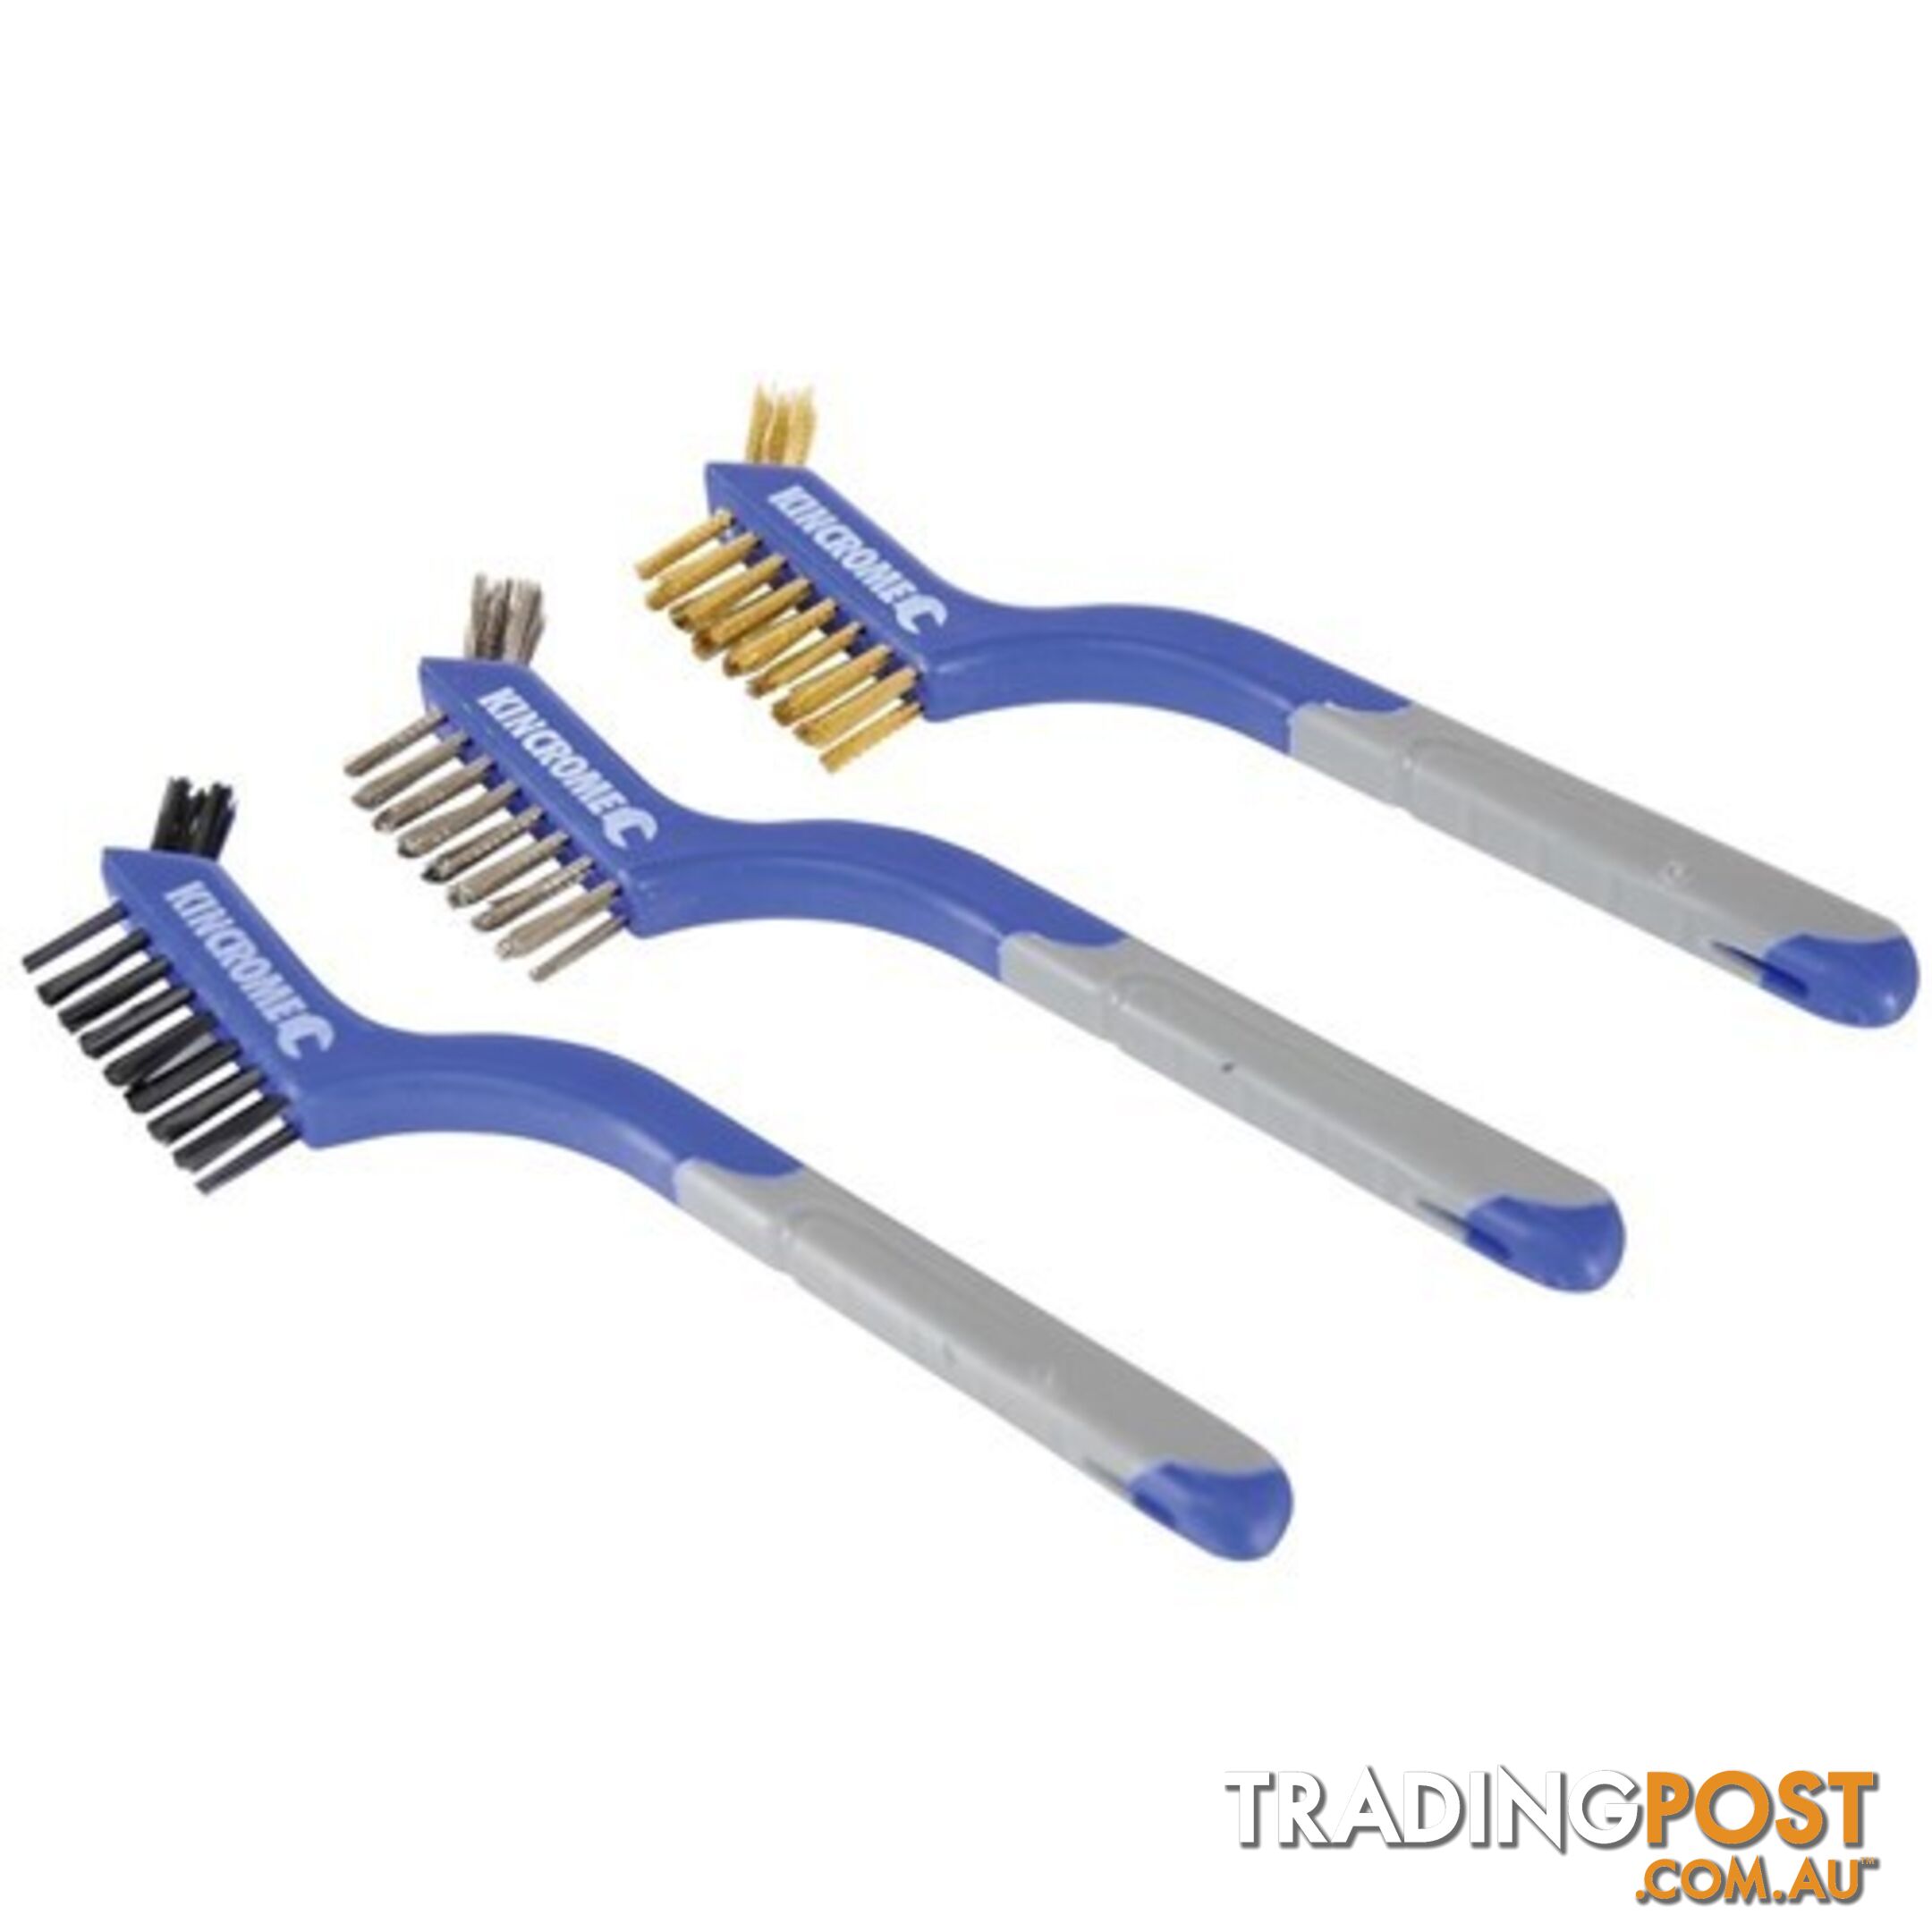 Wire Brush Sets 3 piece Each Small Set 3 Row Bristles Length 175mm Kincrome K6350